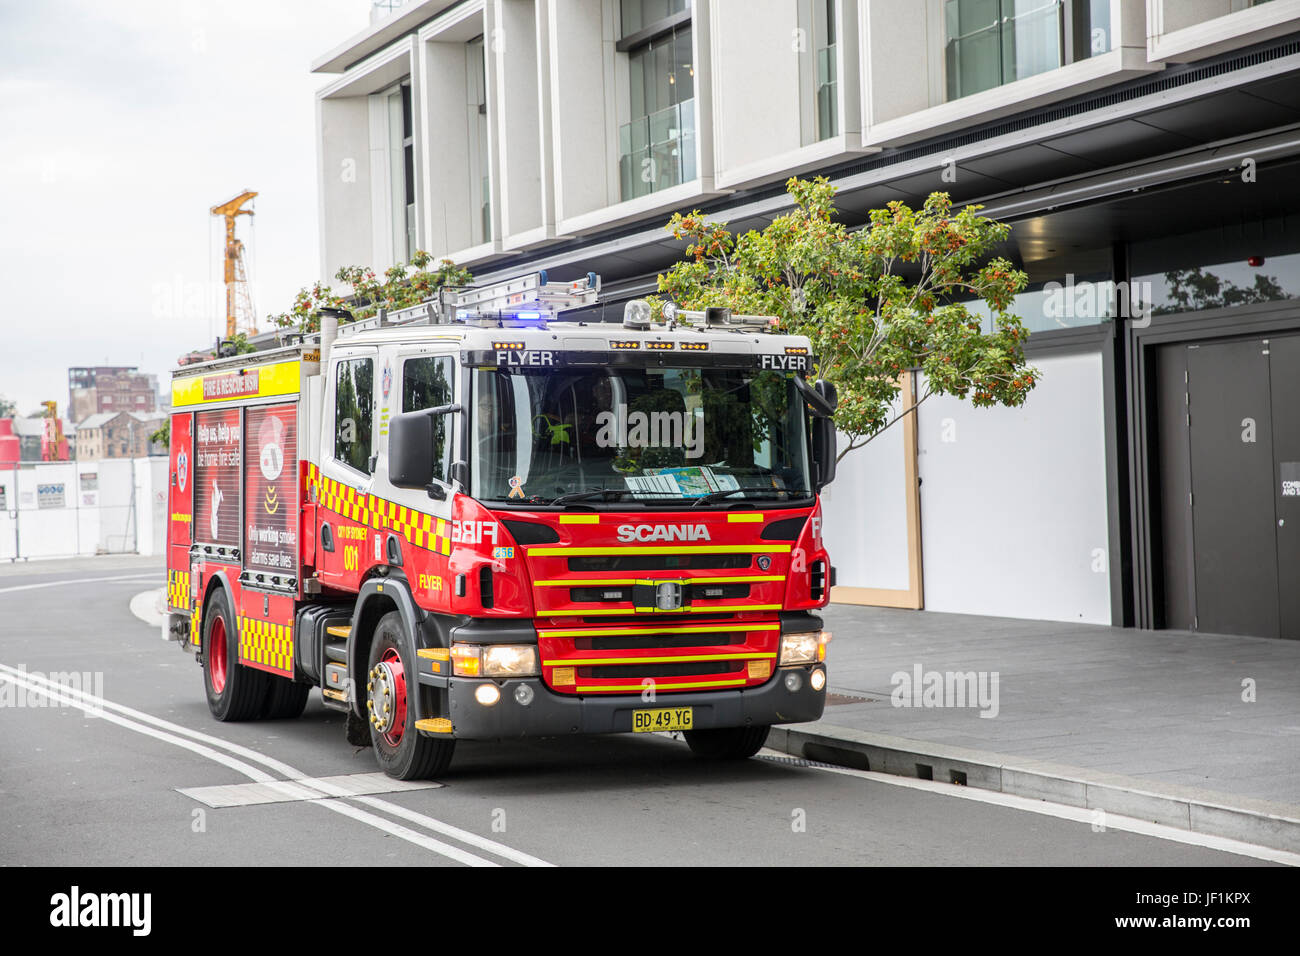 New South Wales fire truck fire engine in Barangaroo area of Sydney city centre,Australia Stock Photo